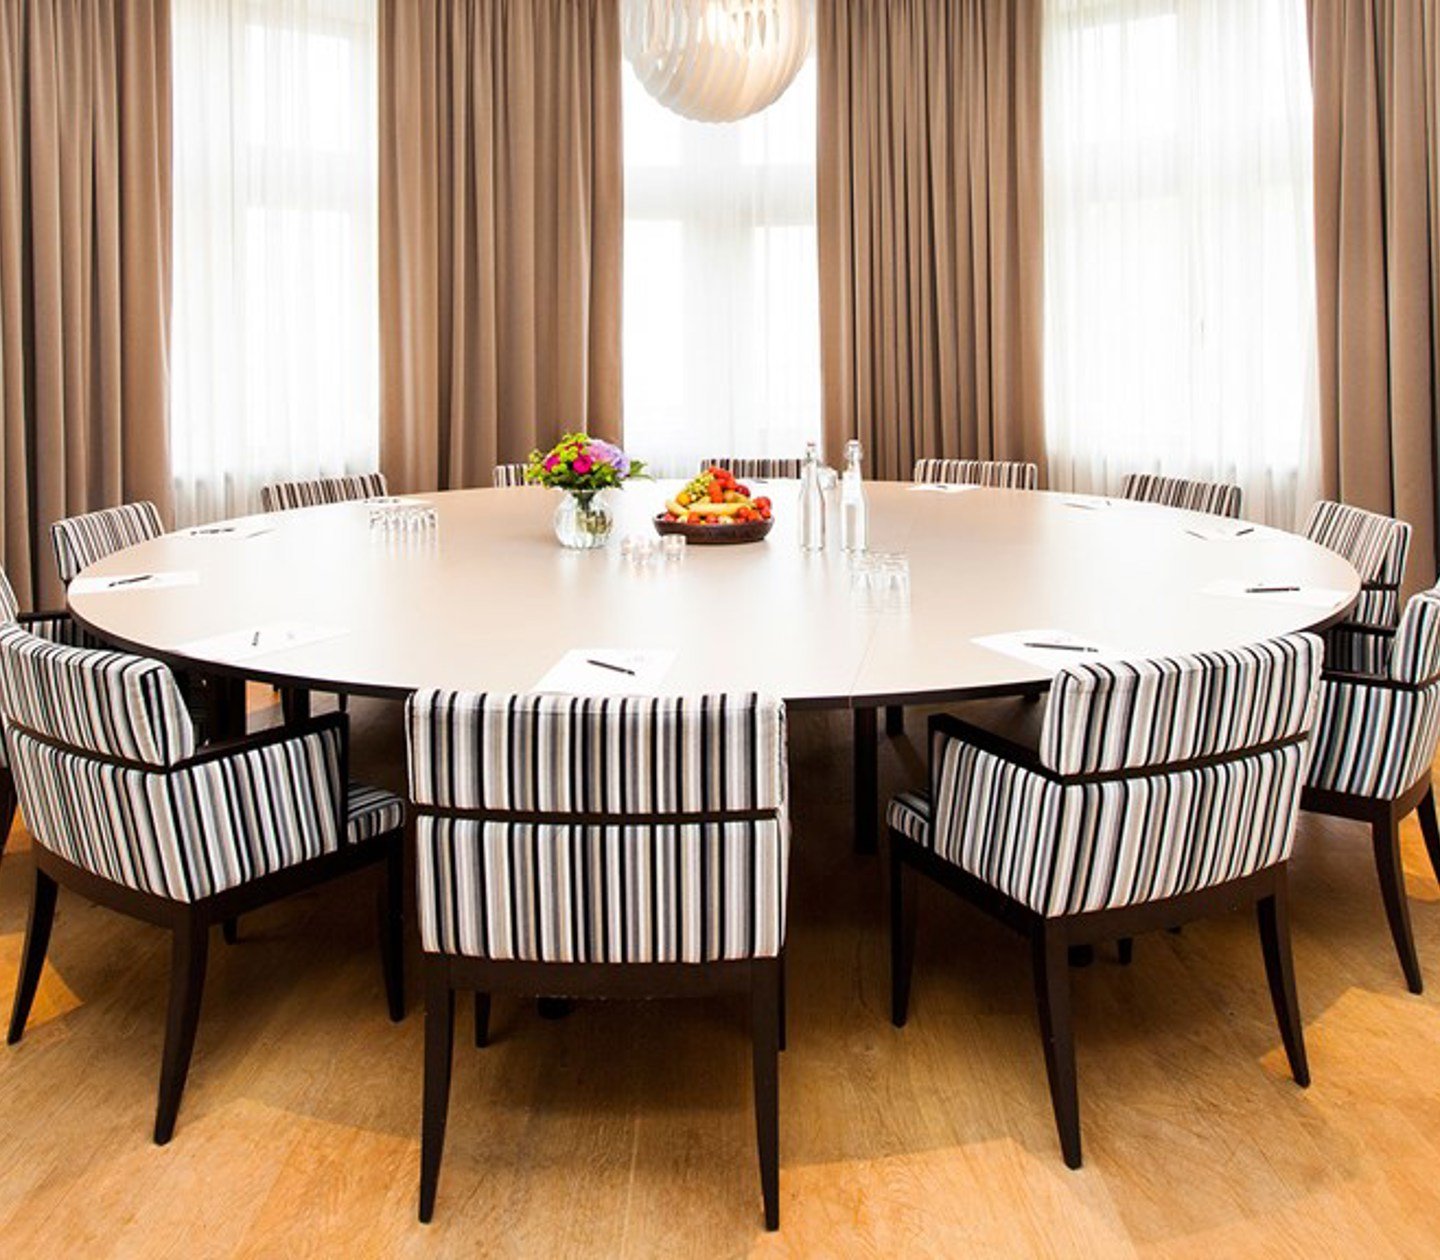 Conference room with round table, striped chairs and large windows